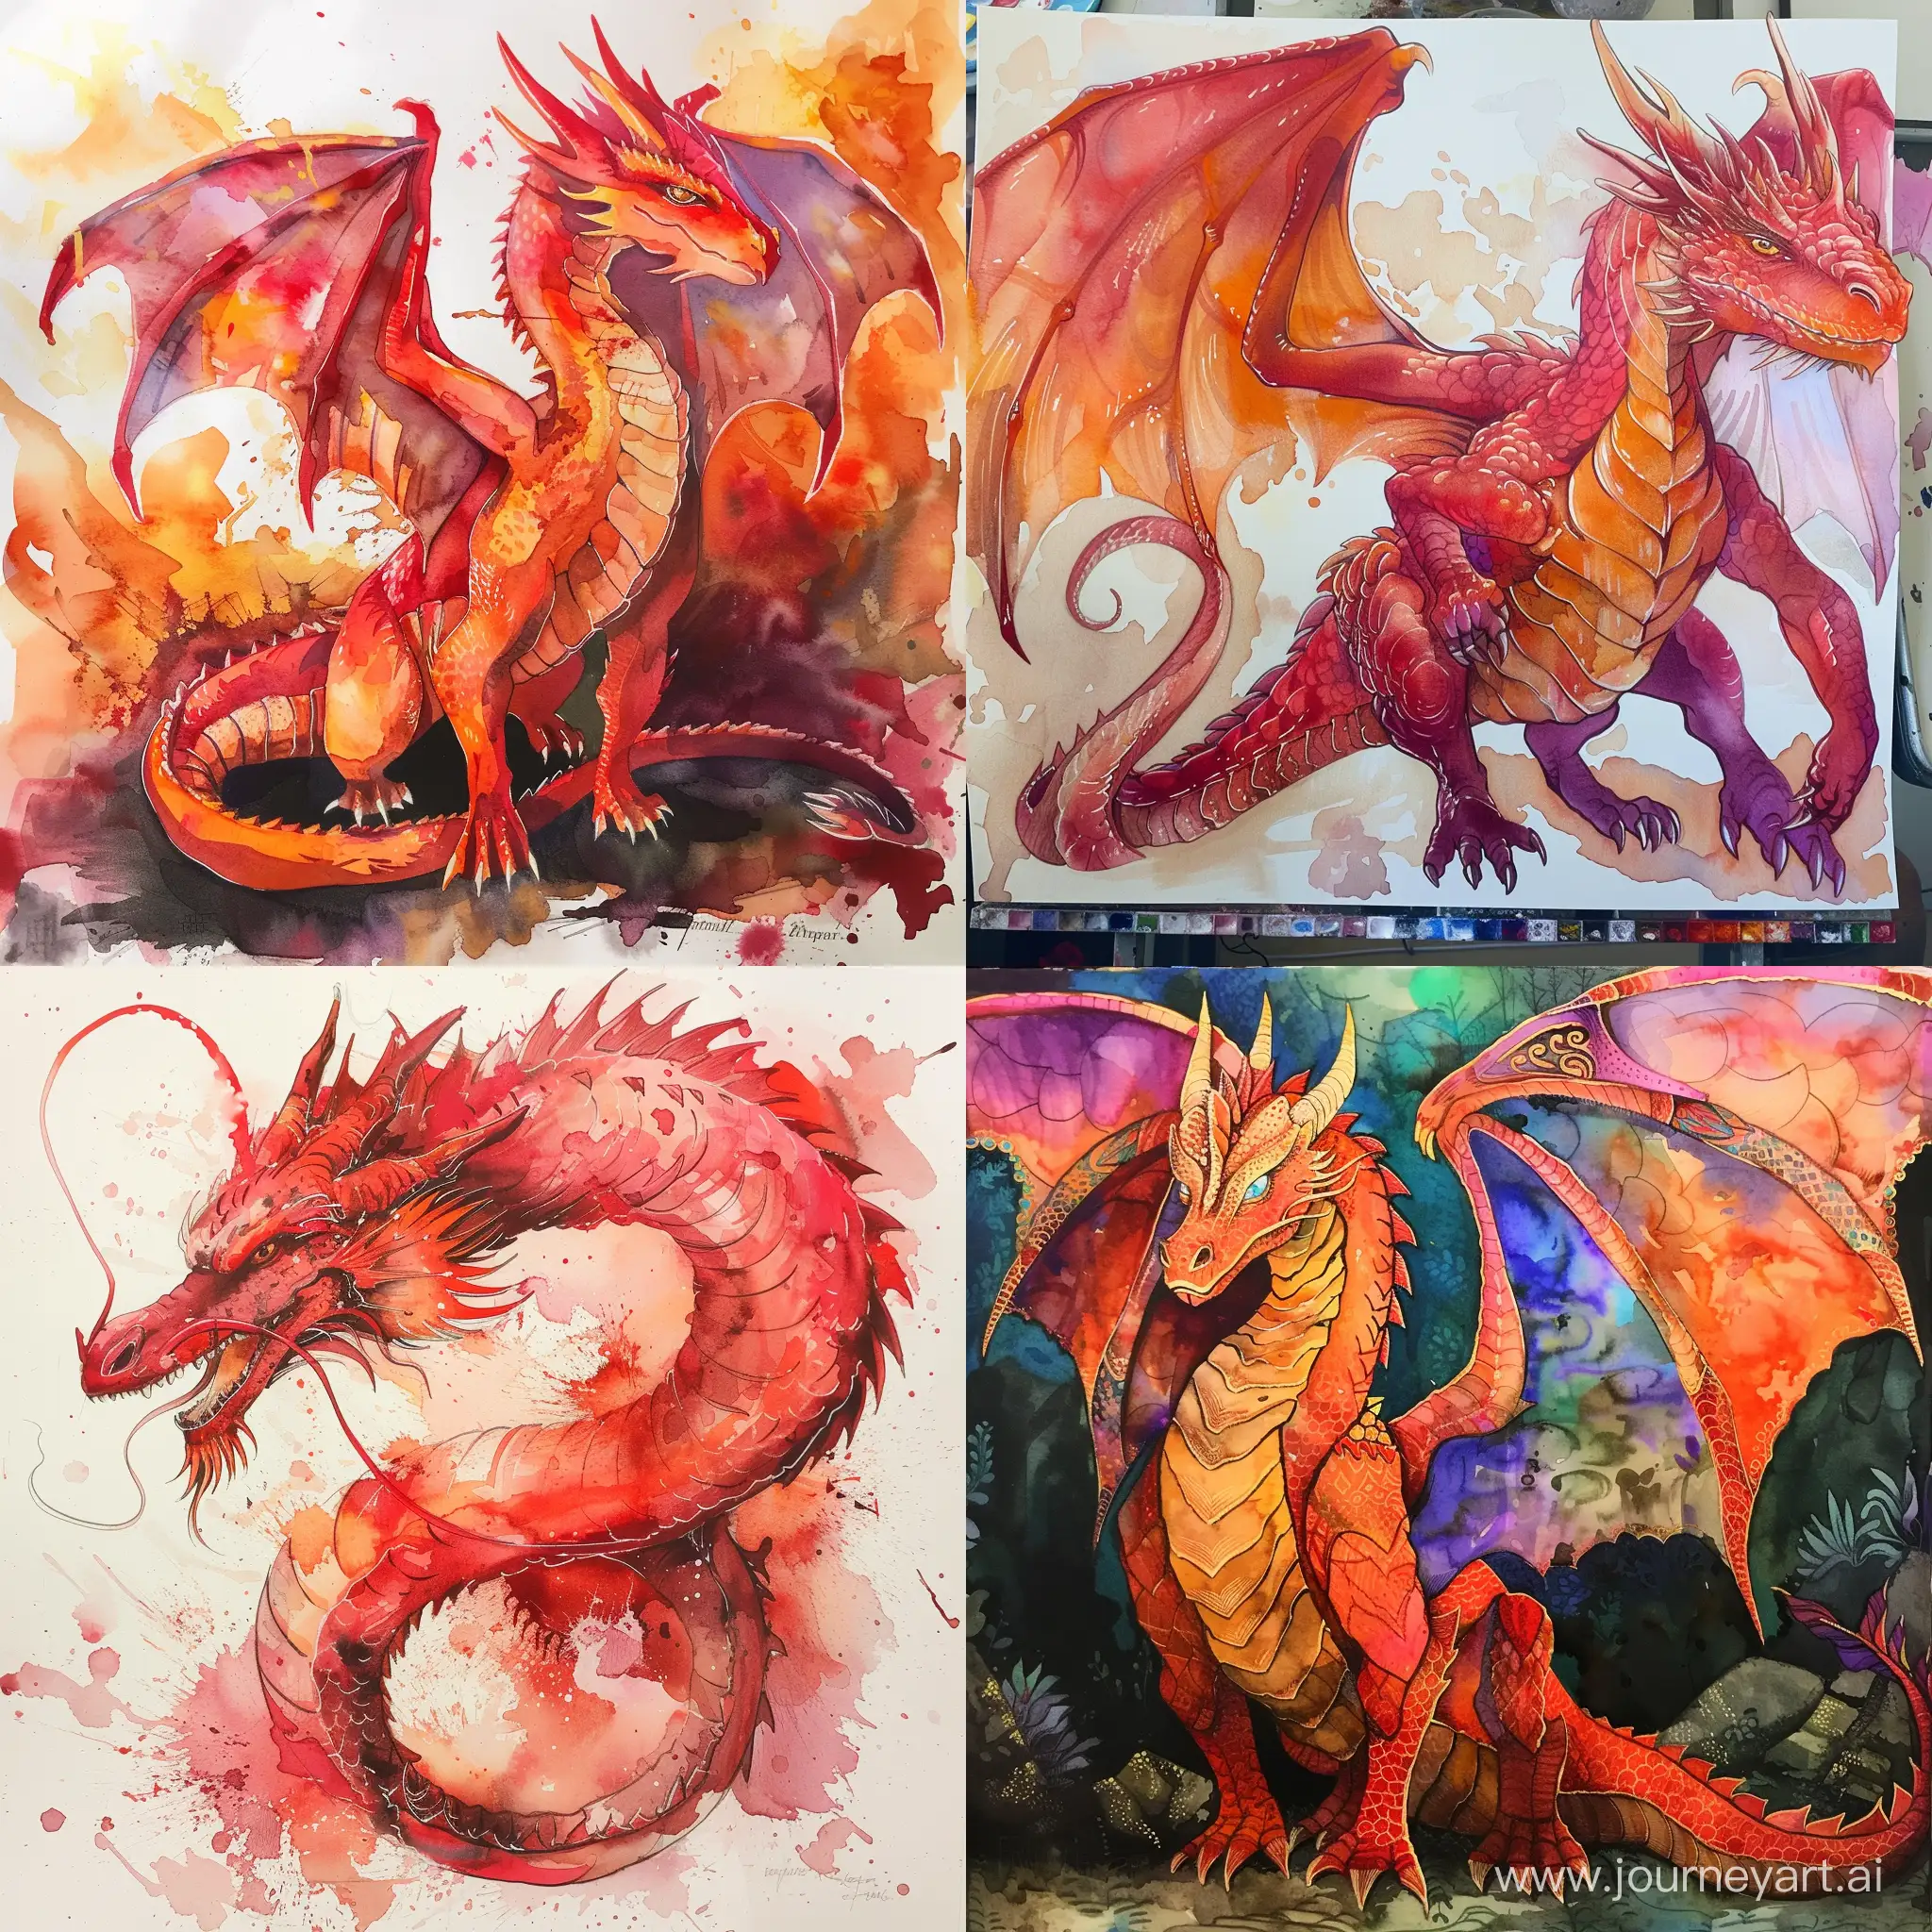 Enormous-Vibrant-Red-Watercolor-Dragon-Painting